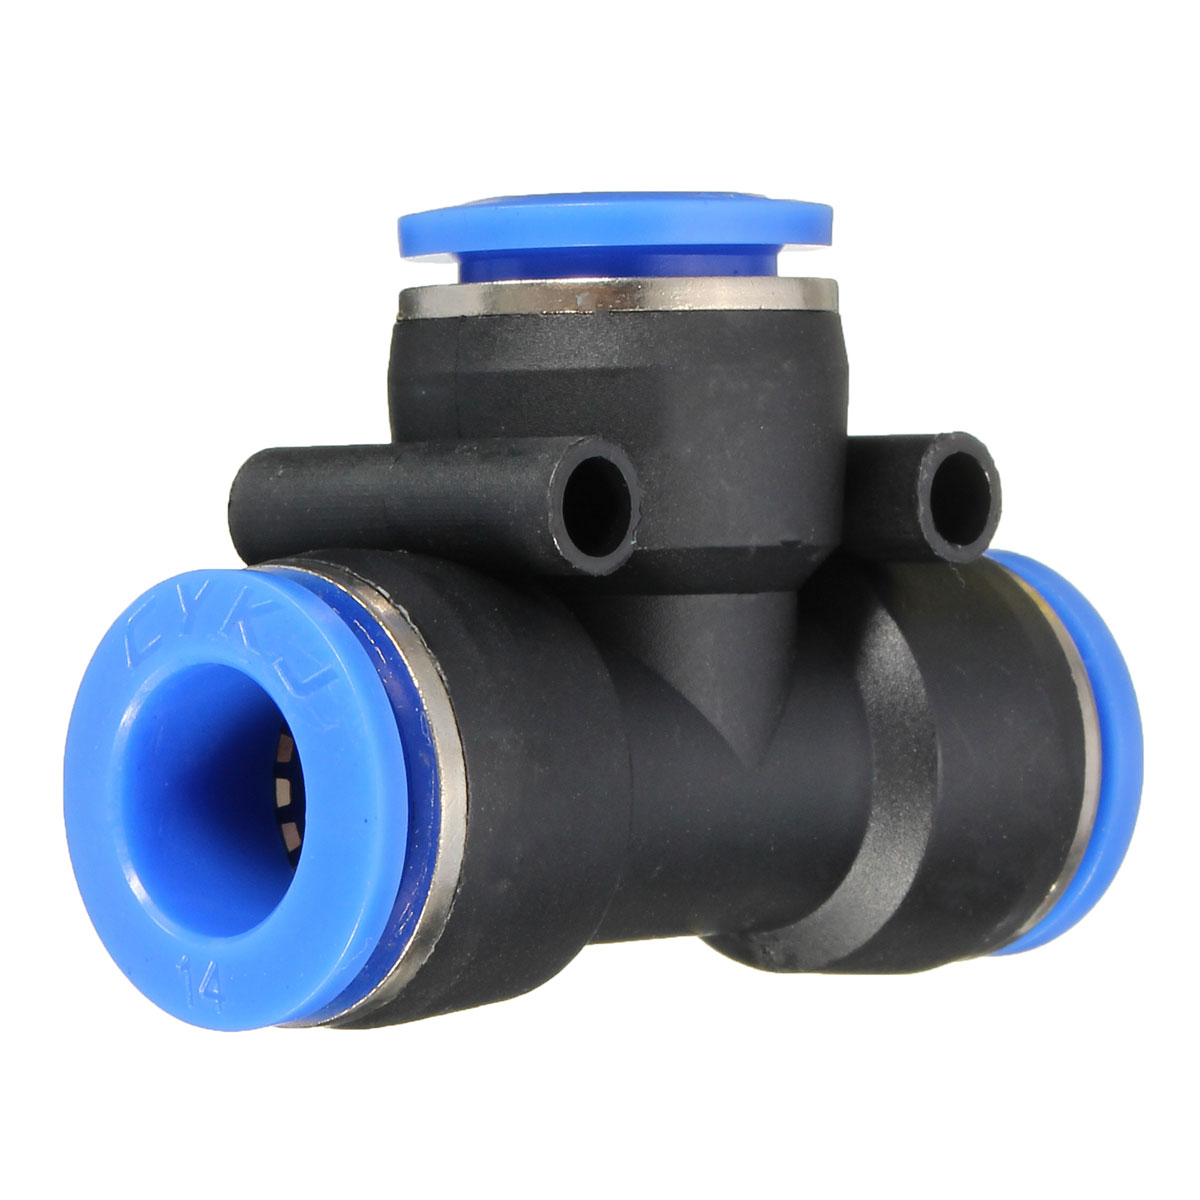 Pneumatic-Push-In-Fittings-For-Air-Water-Hose-Pipe-Connectors-Tube-Connector-1030560-3